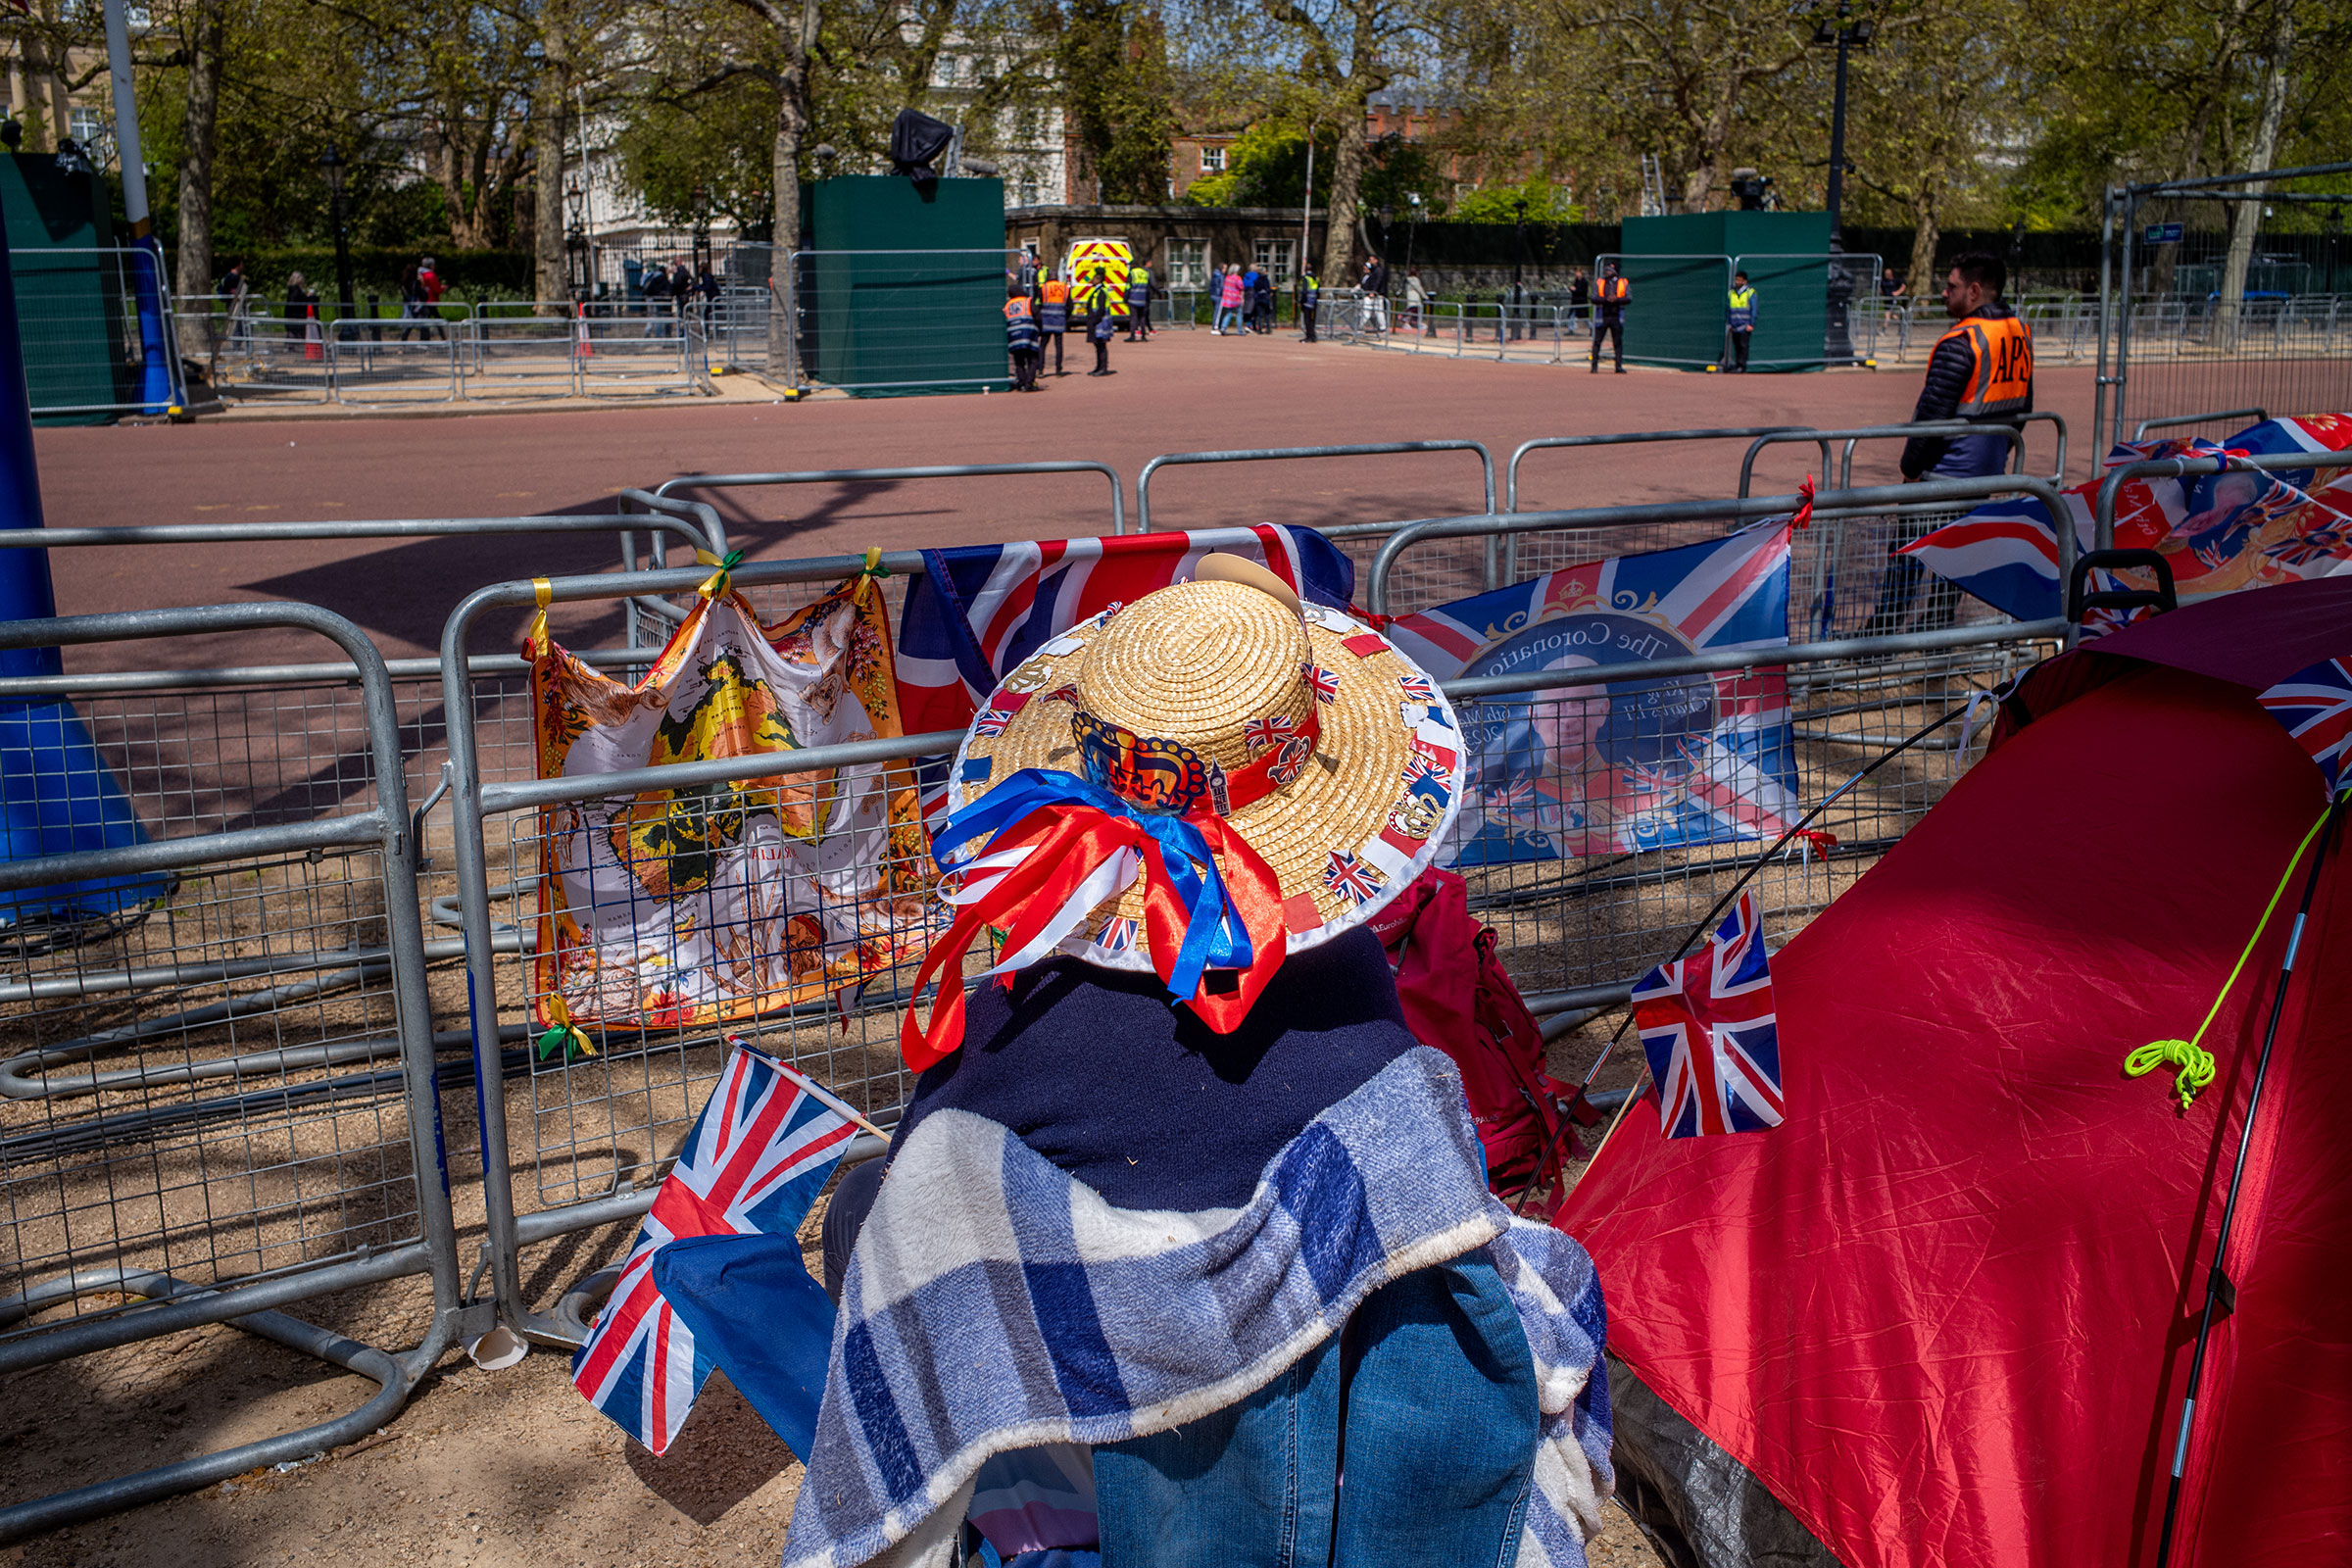 Julia Walker sits waiting along the procession line on May 3. The Coronation of King Charles III and The Queen Consort will take place on May 6.